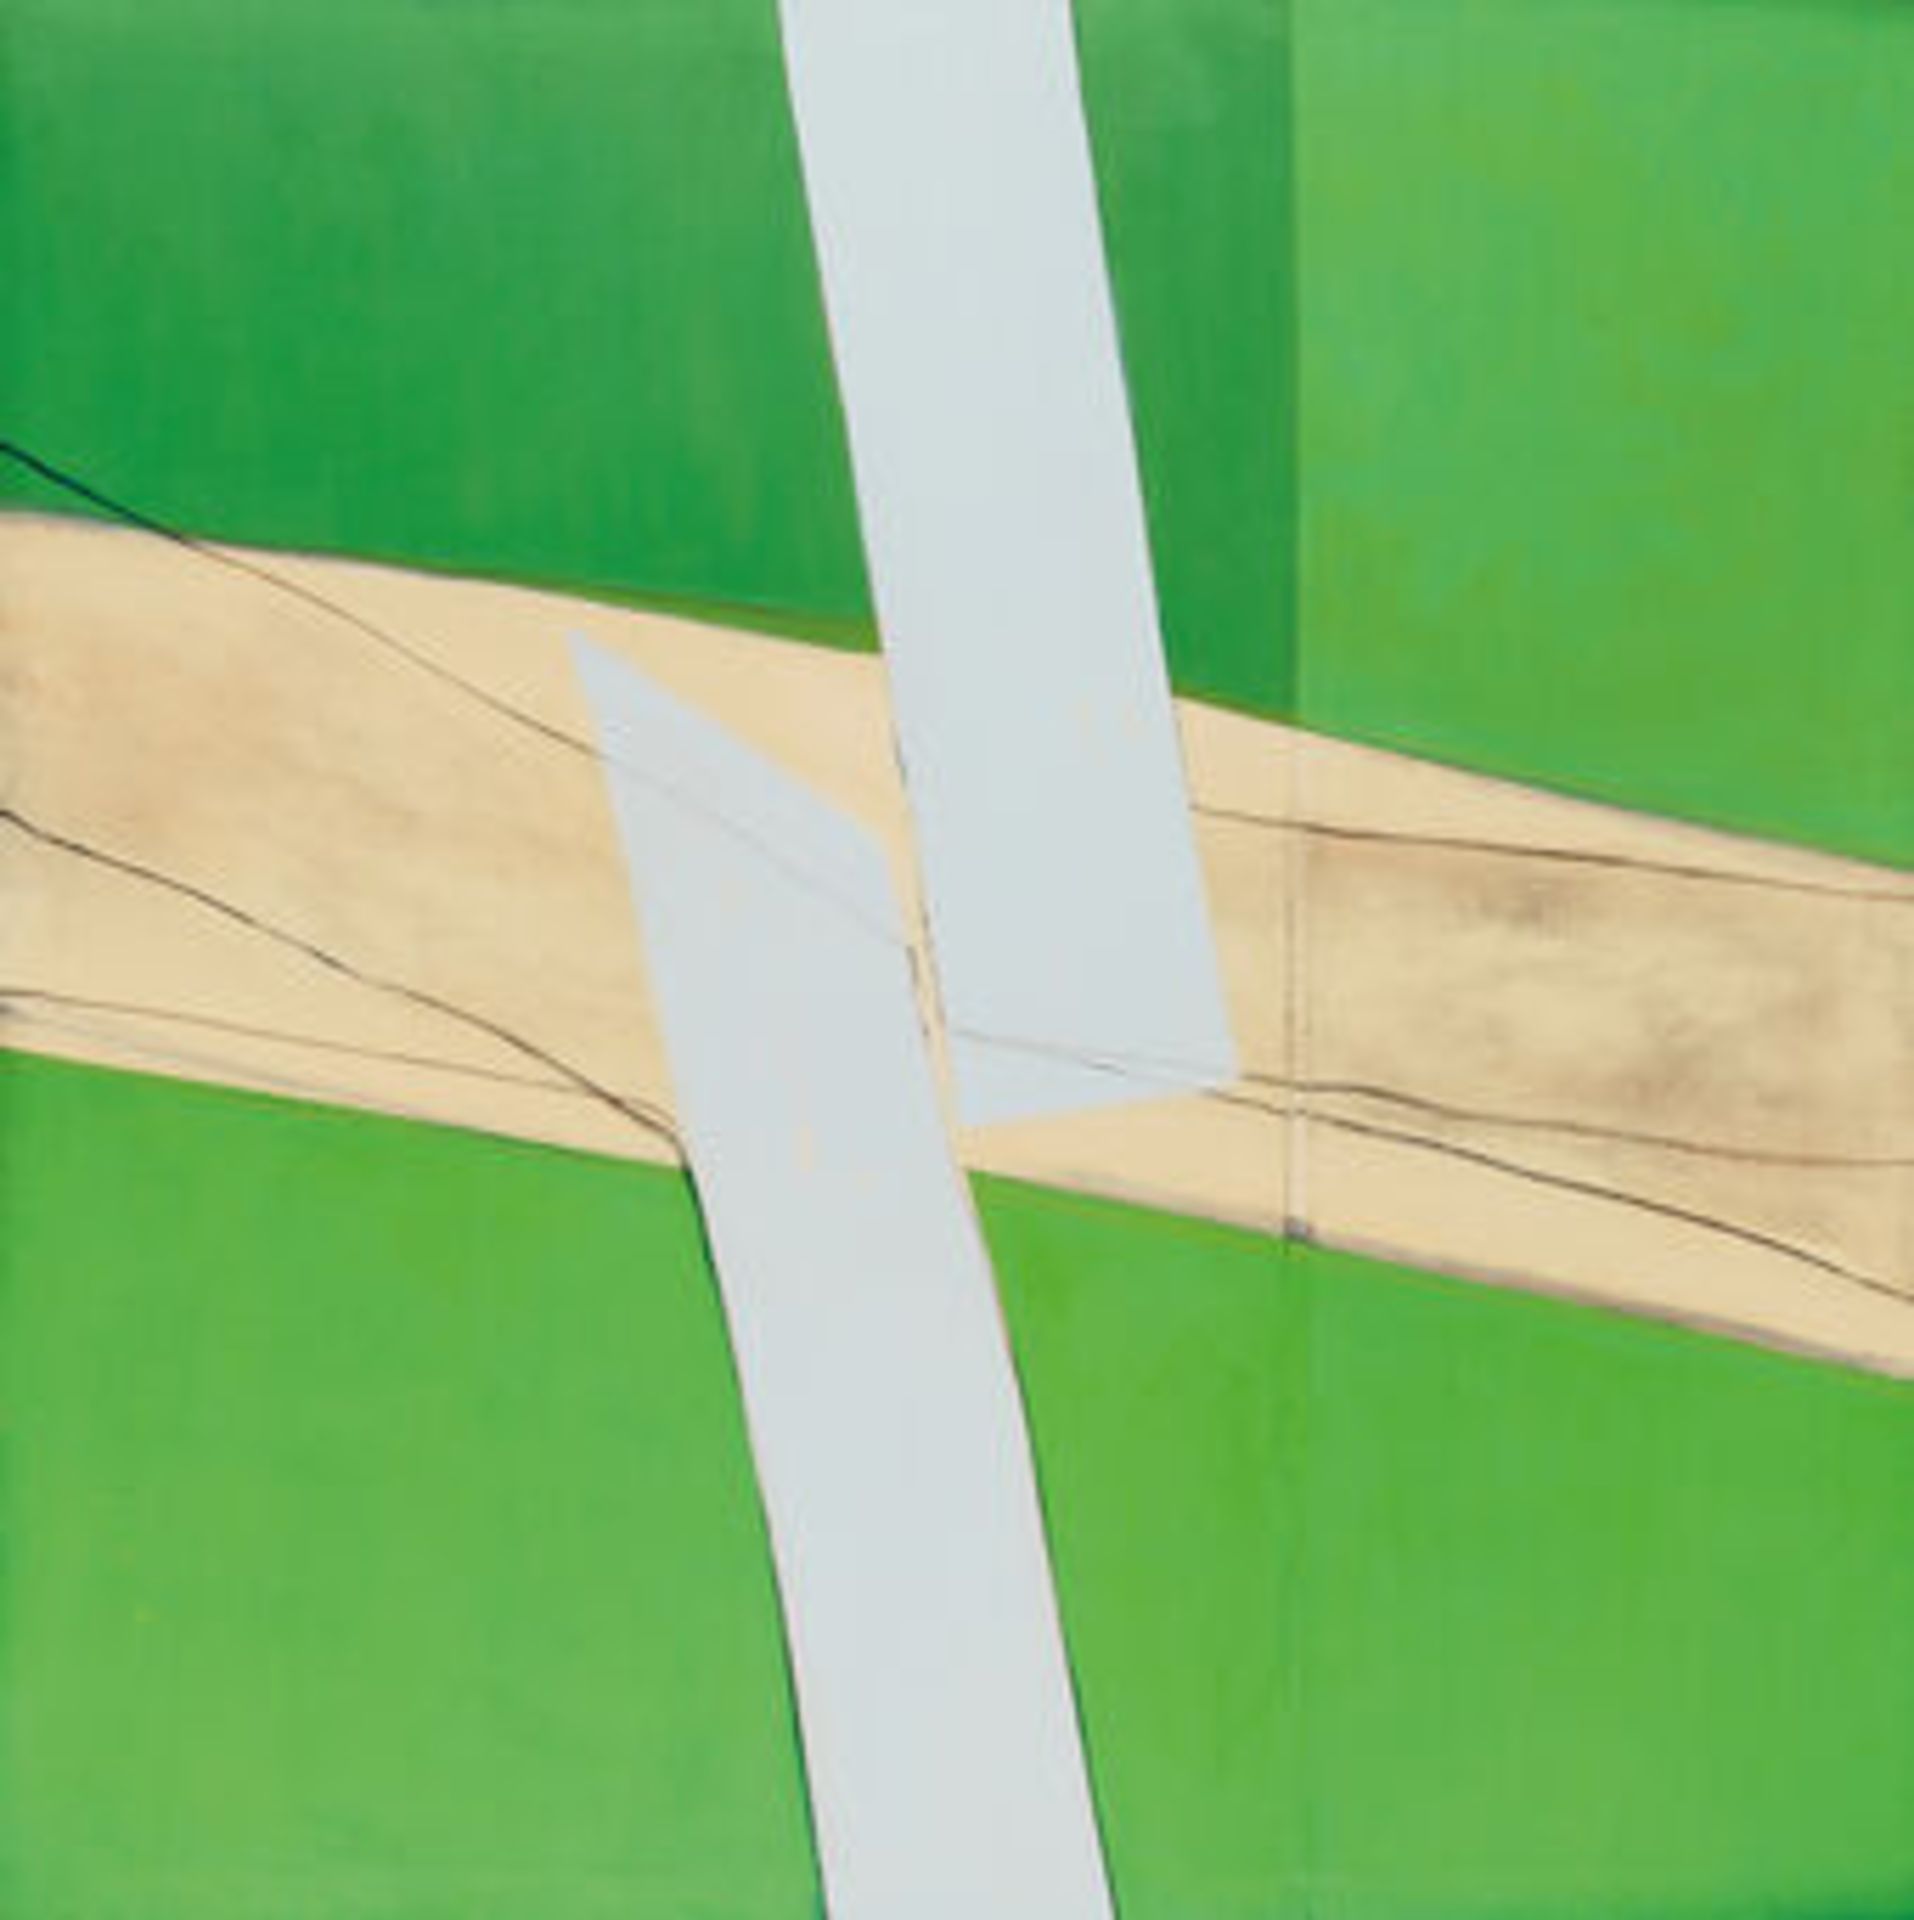 Sandra Blow "Green and White, 1969" Offset Lithograph